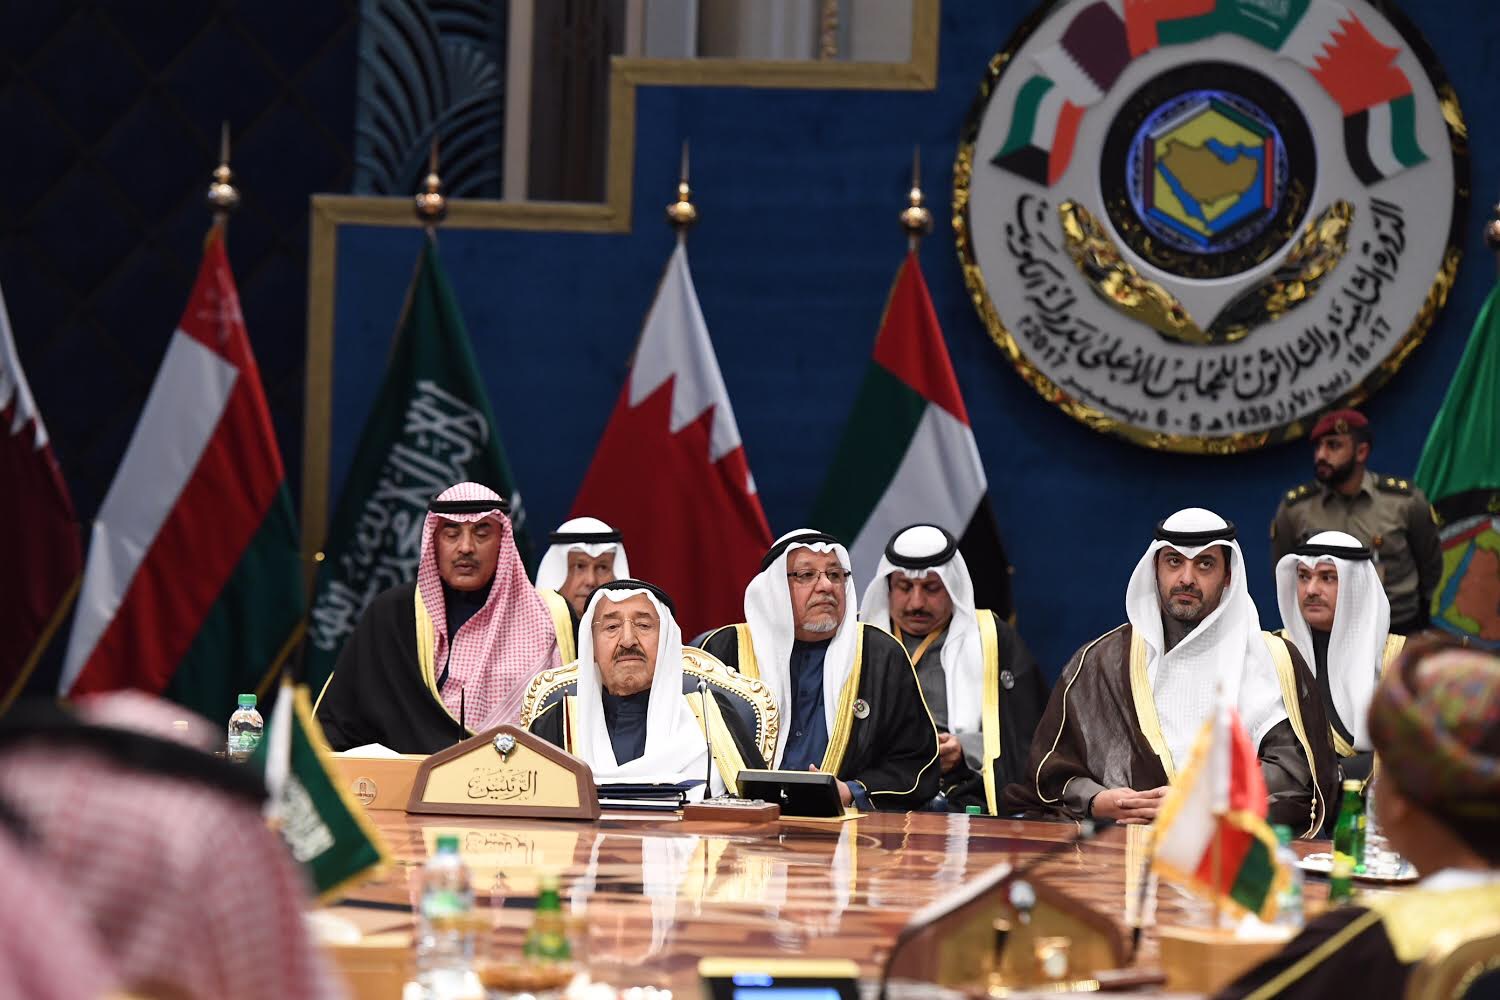 His Highness the Amir Sheikh Sabah Al-Ahmad Al-Jaber Al-Sabah speech at the inauguration of the 38th Gulf Summit in Kuwait 